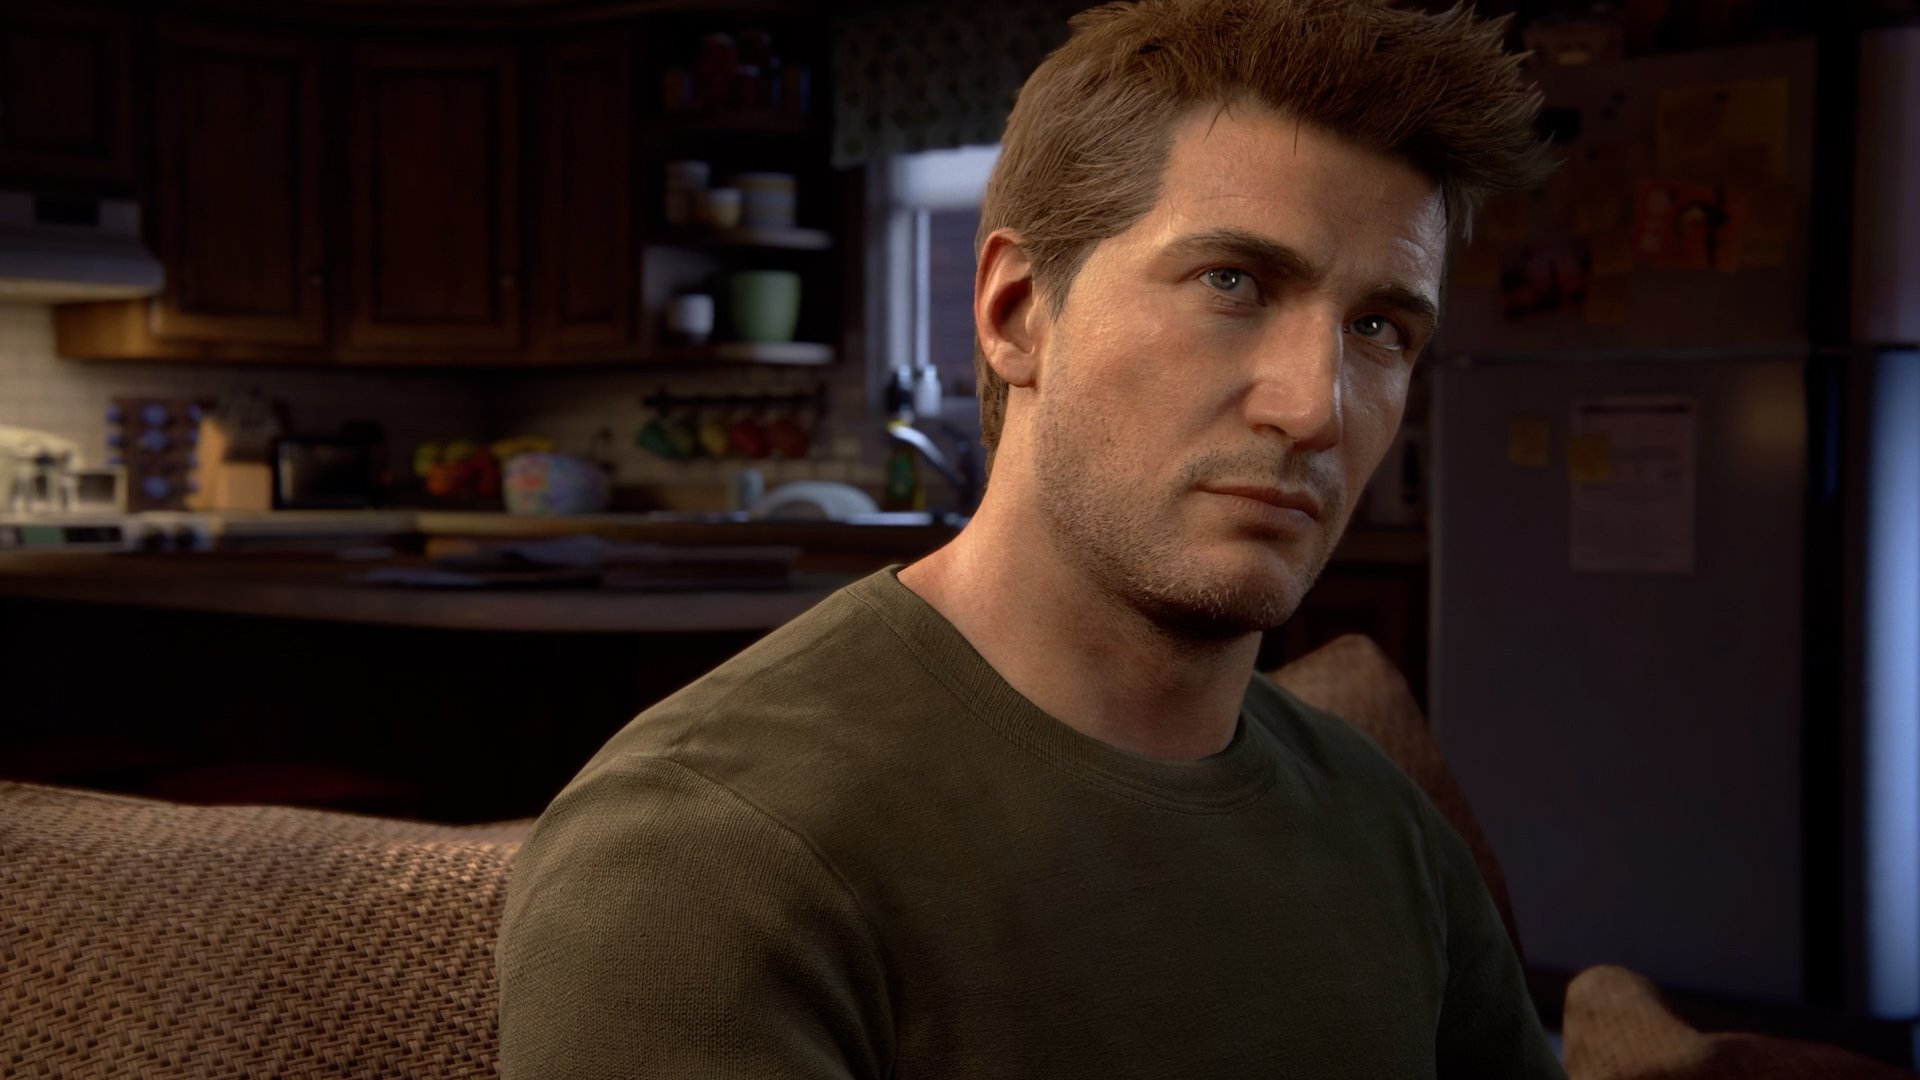 Uncharted 5' Has Not Been Ruled Out Reveals Naughty Dog